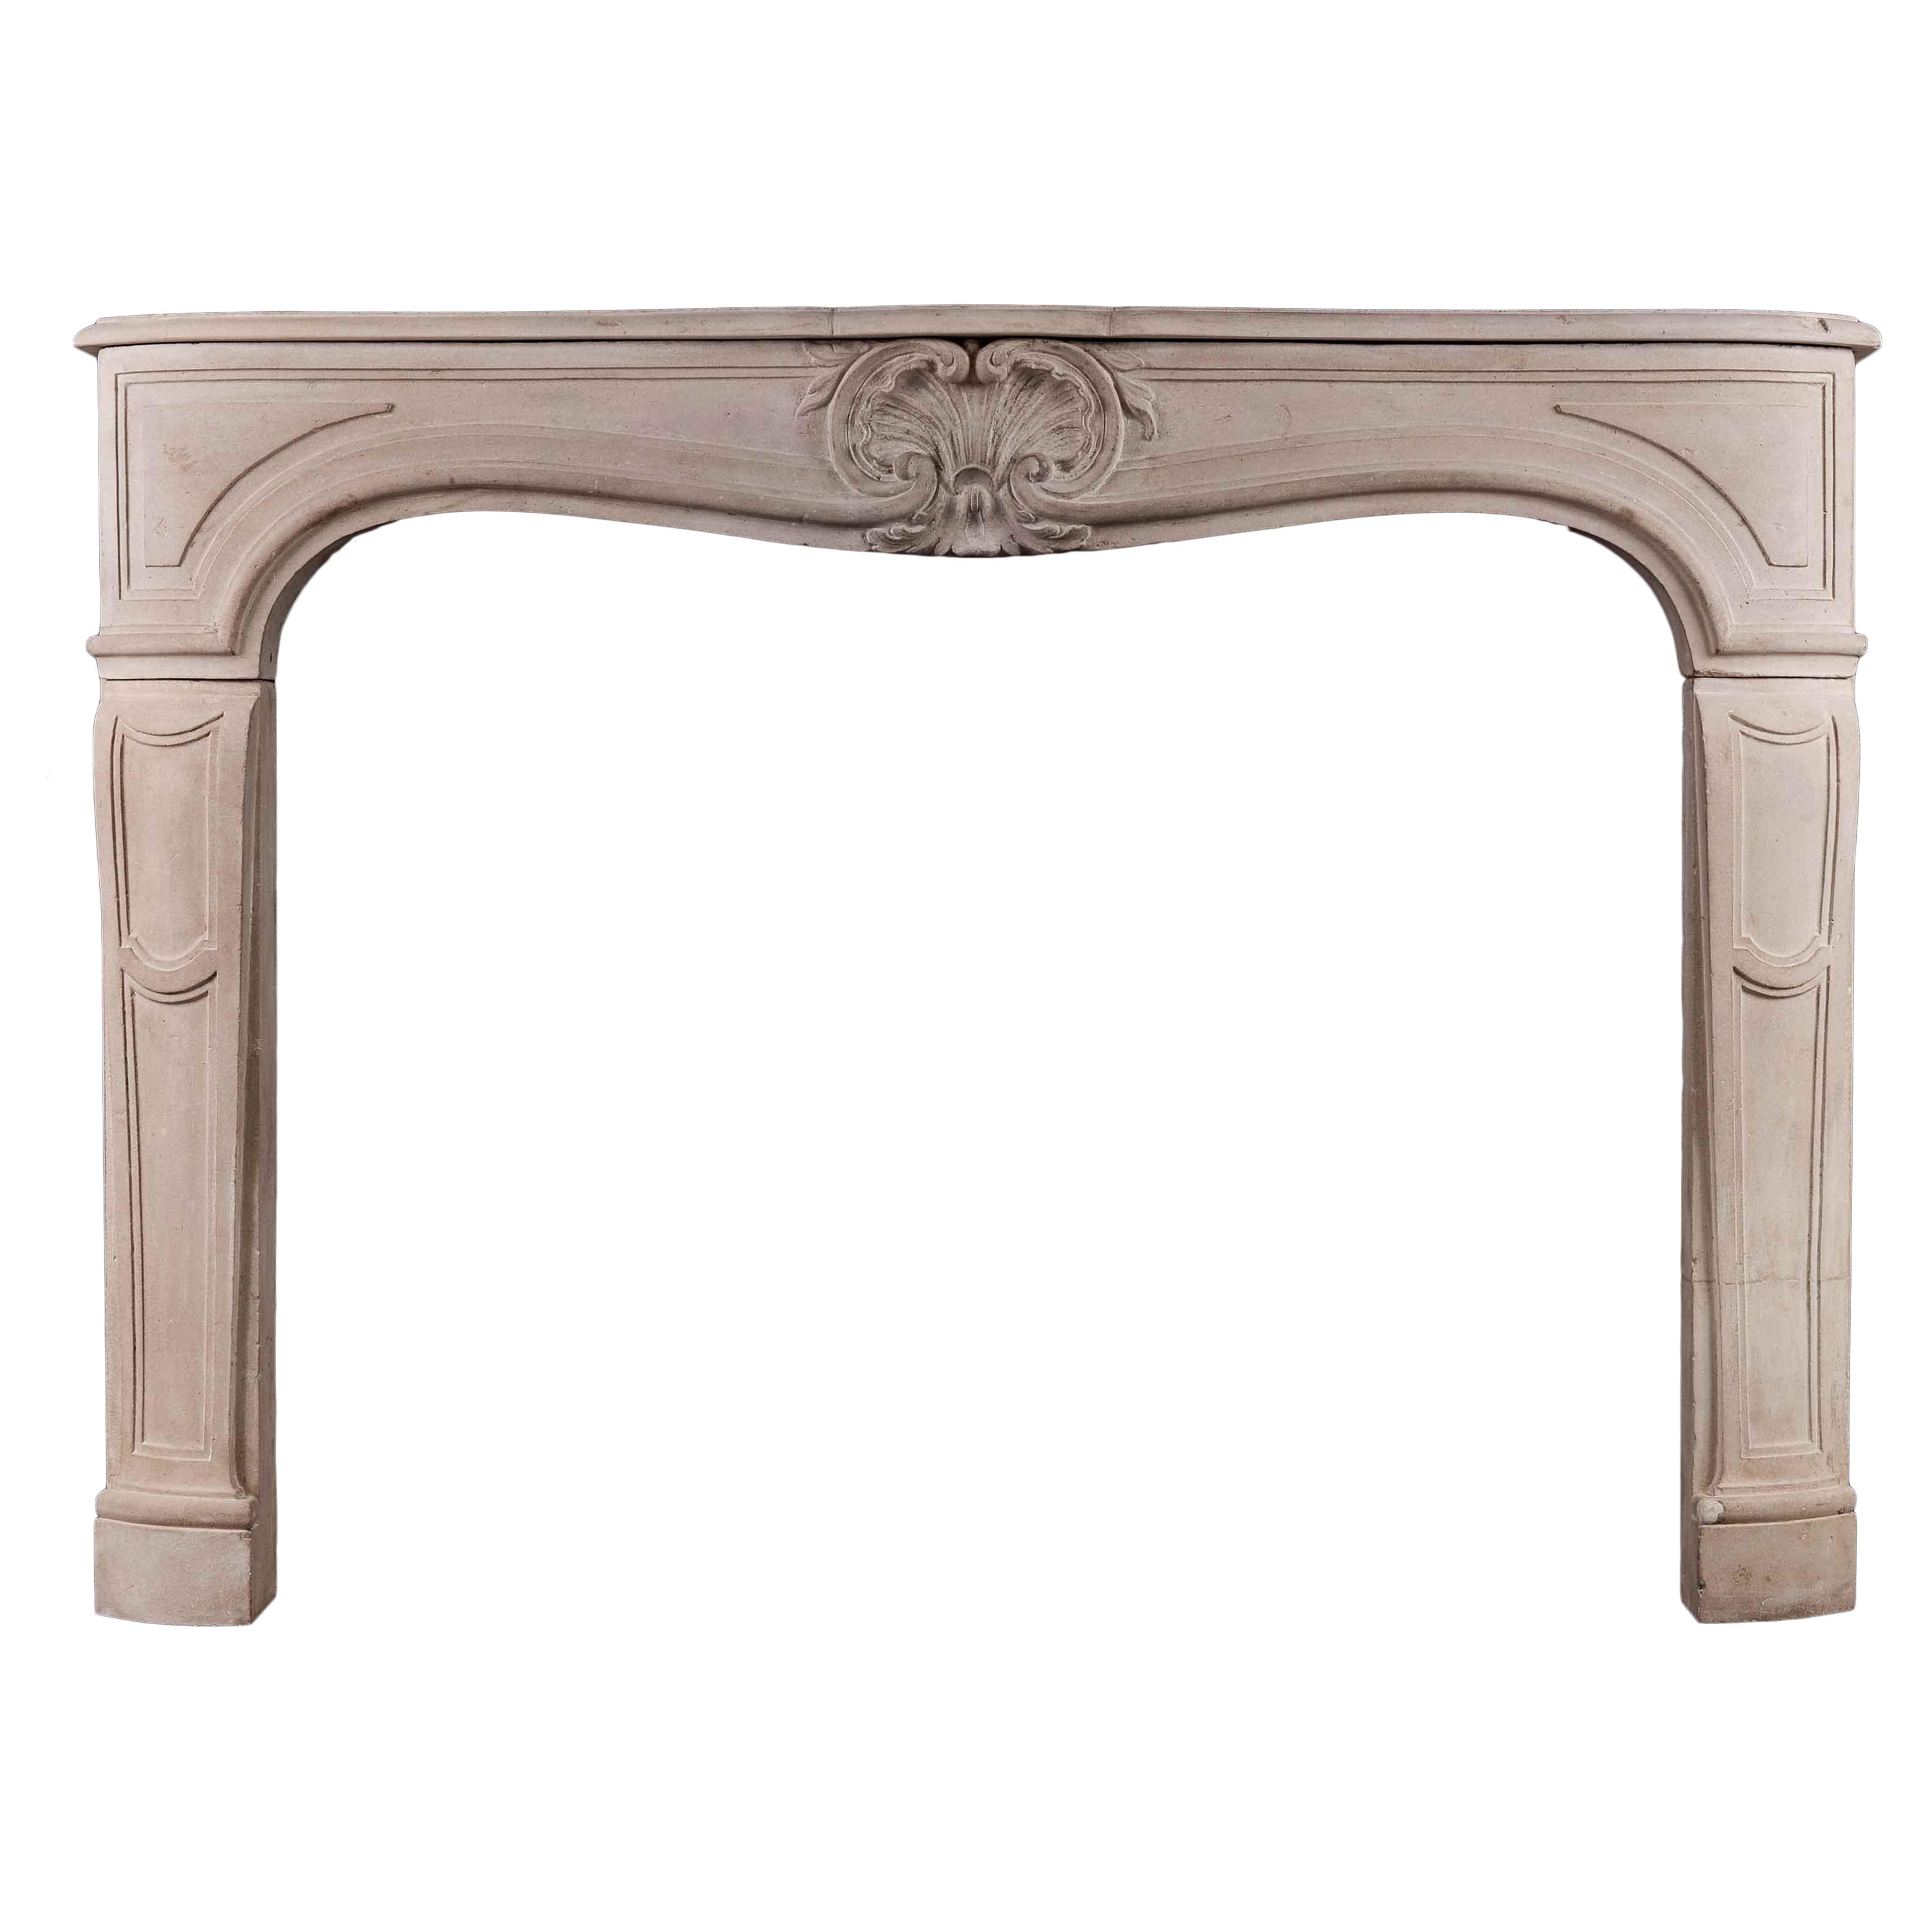 19th Century French Louis XV Style Antique Chimneypiece